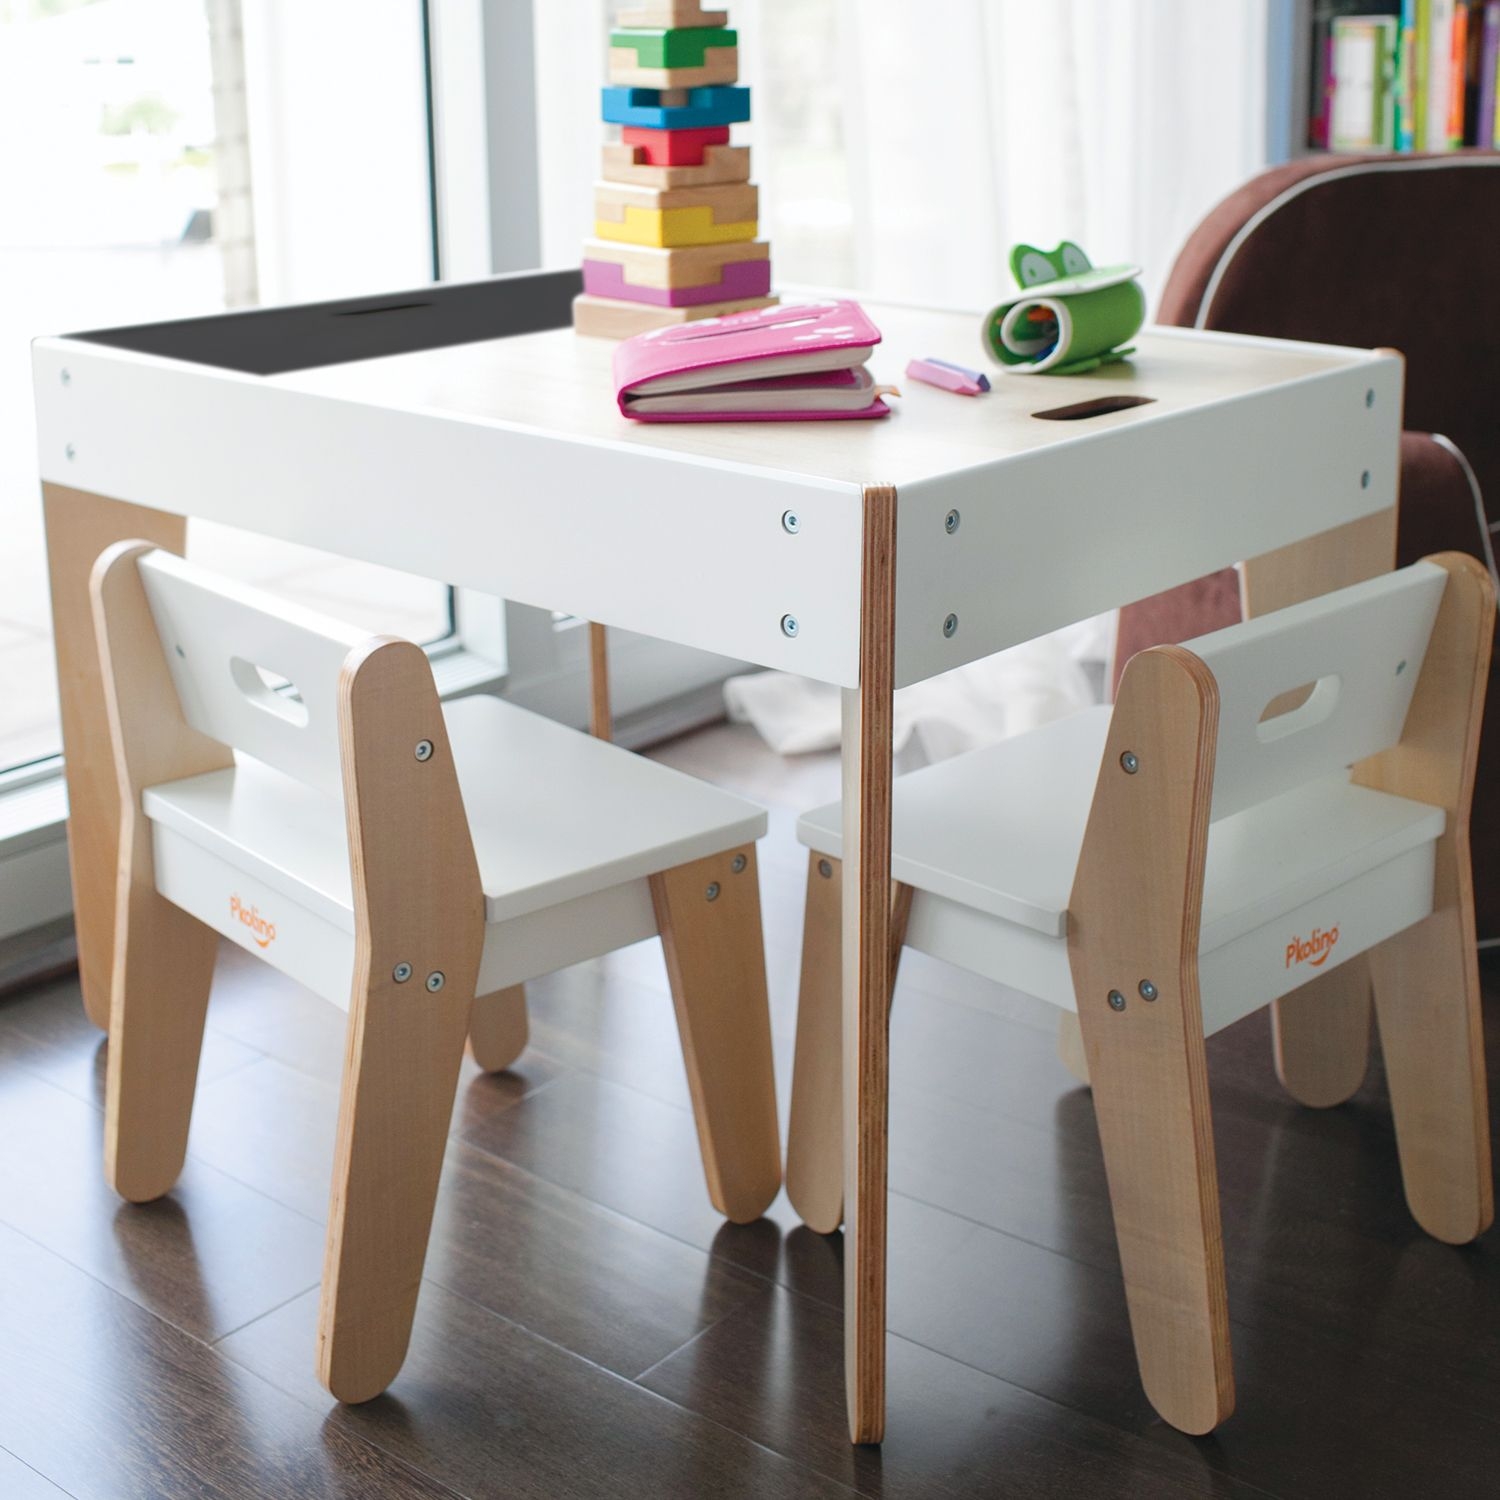 childrens table sets